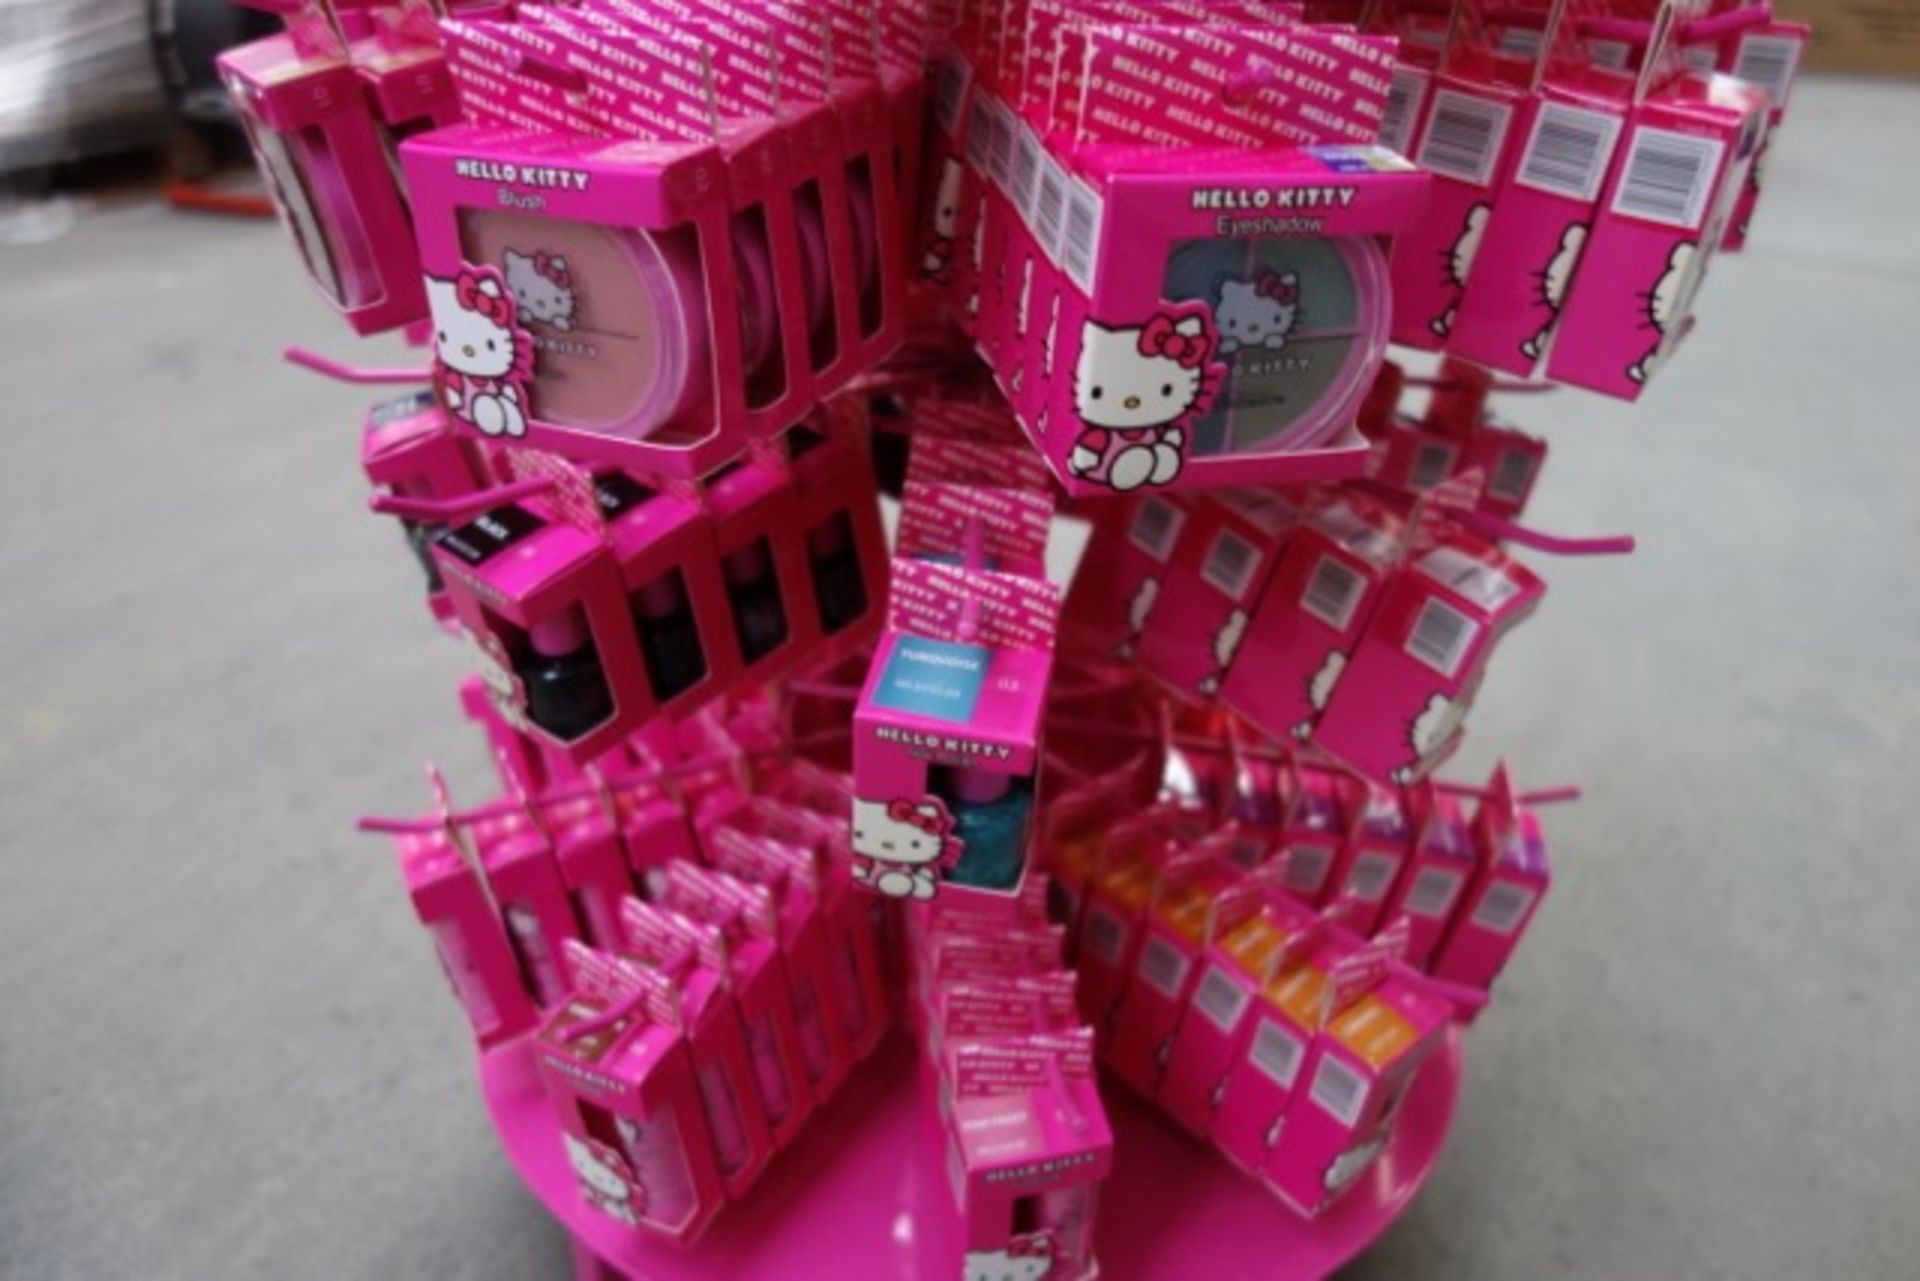 Display Stand Containing Approx. 240 Pieces of Hello Kitty Cosmetics - each with a RRP of £3.50 - Bild 6 aus 9